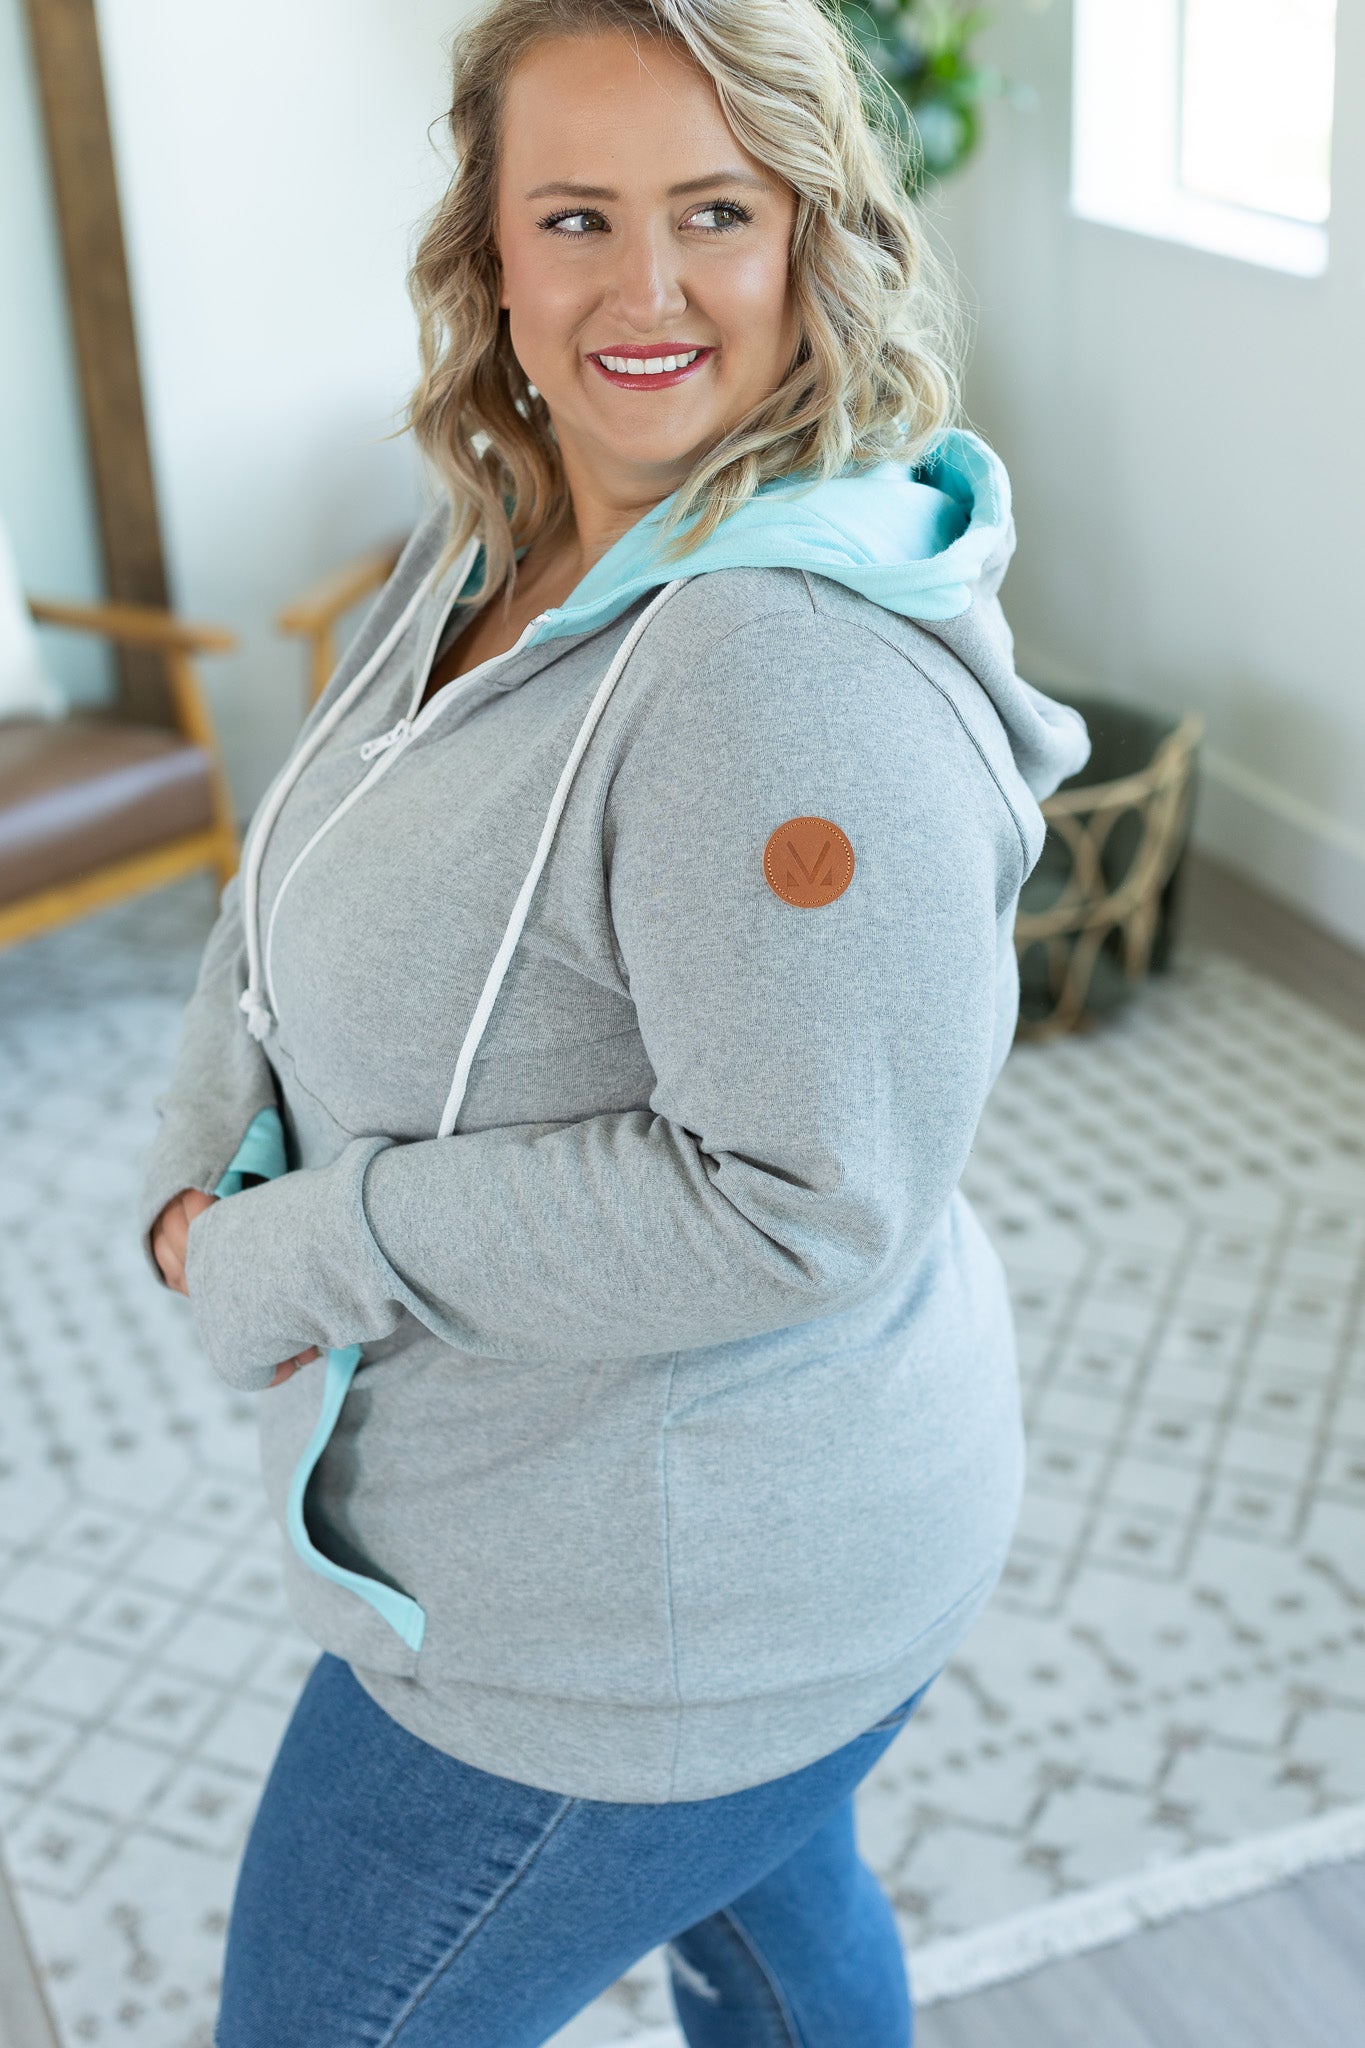 IN STOCK Avery Accent HalfZip Hoodie - Grey and Aqua - AnnRose Boutique